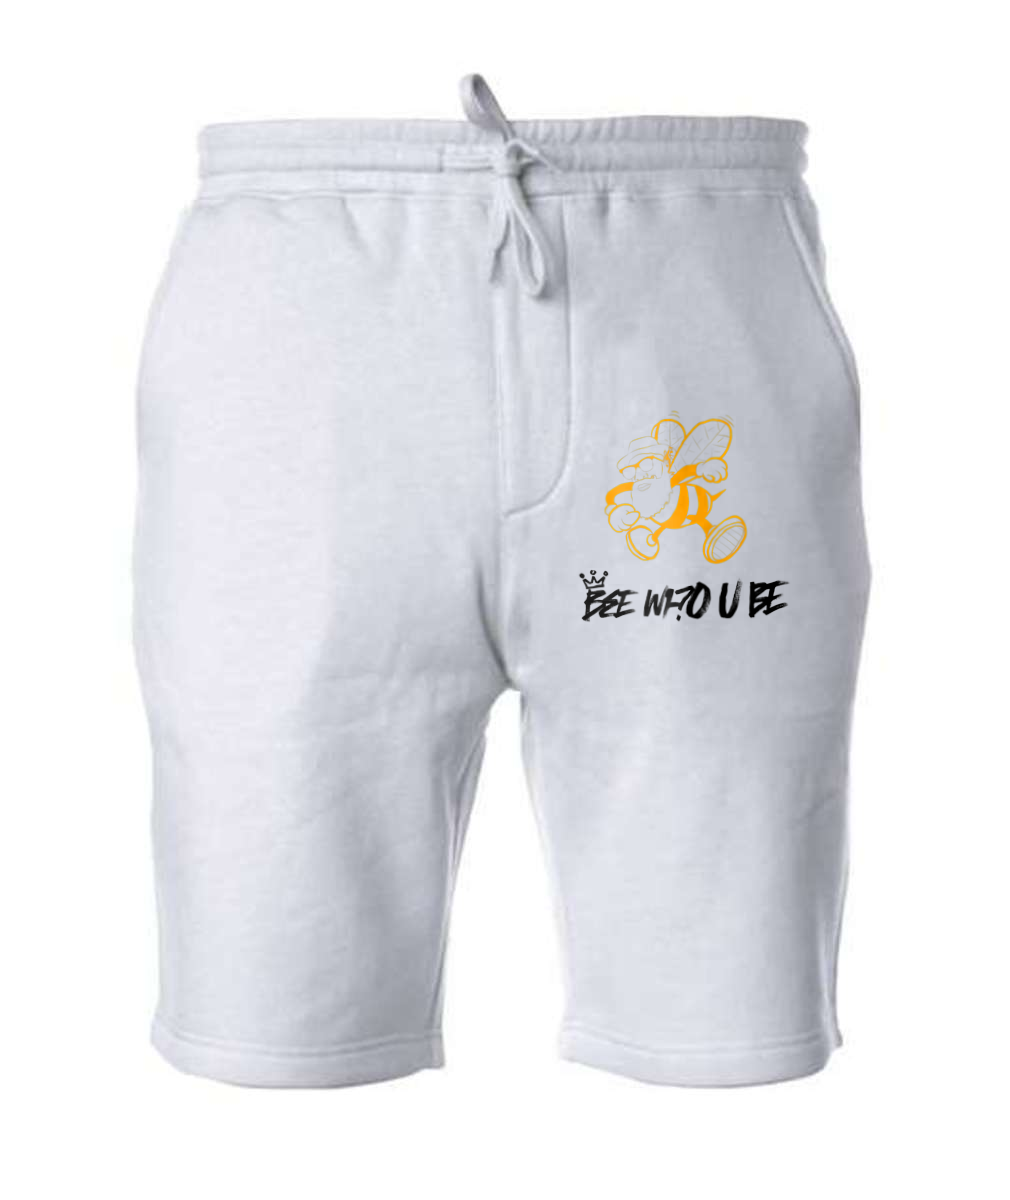 Bee Who U Bee Embroidered Independent Trading Co. - Midweight Fleece Shorts or Similar